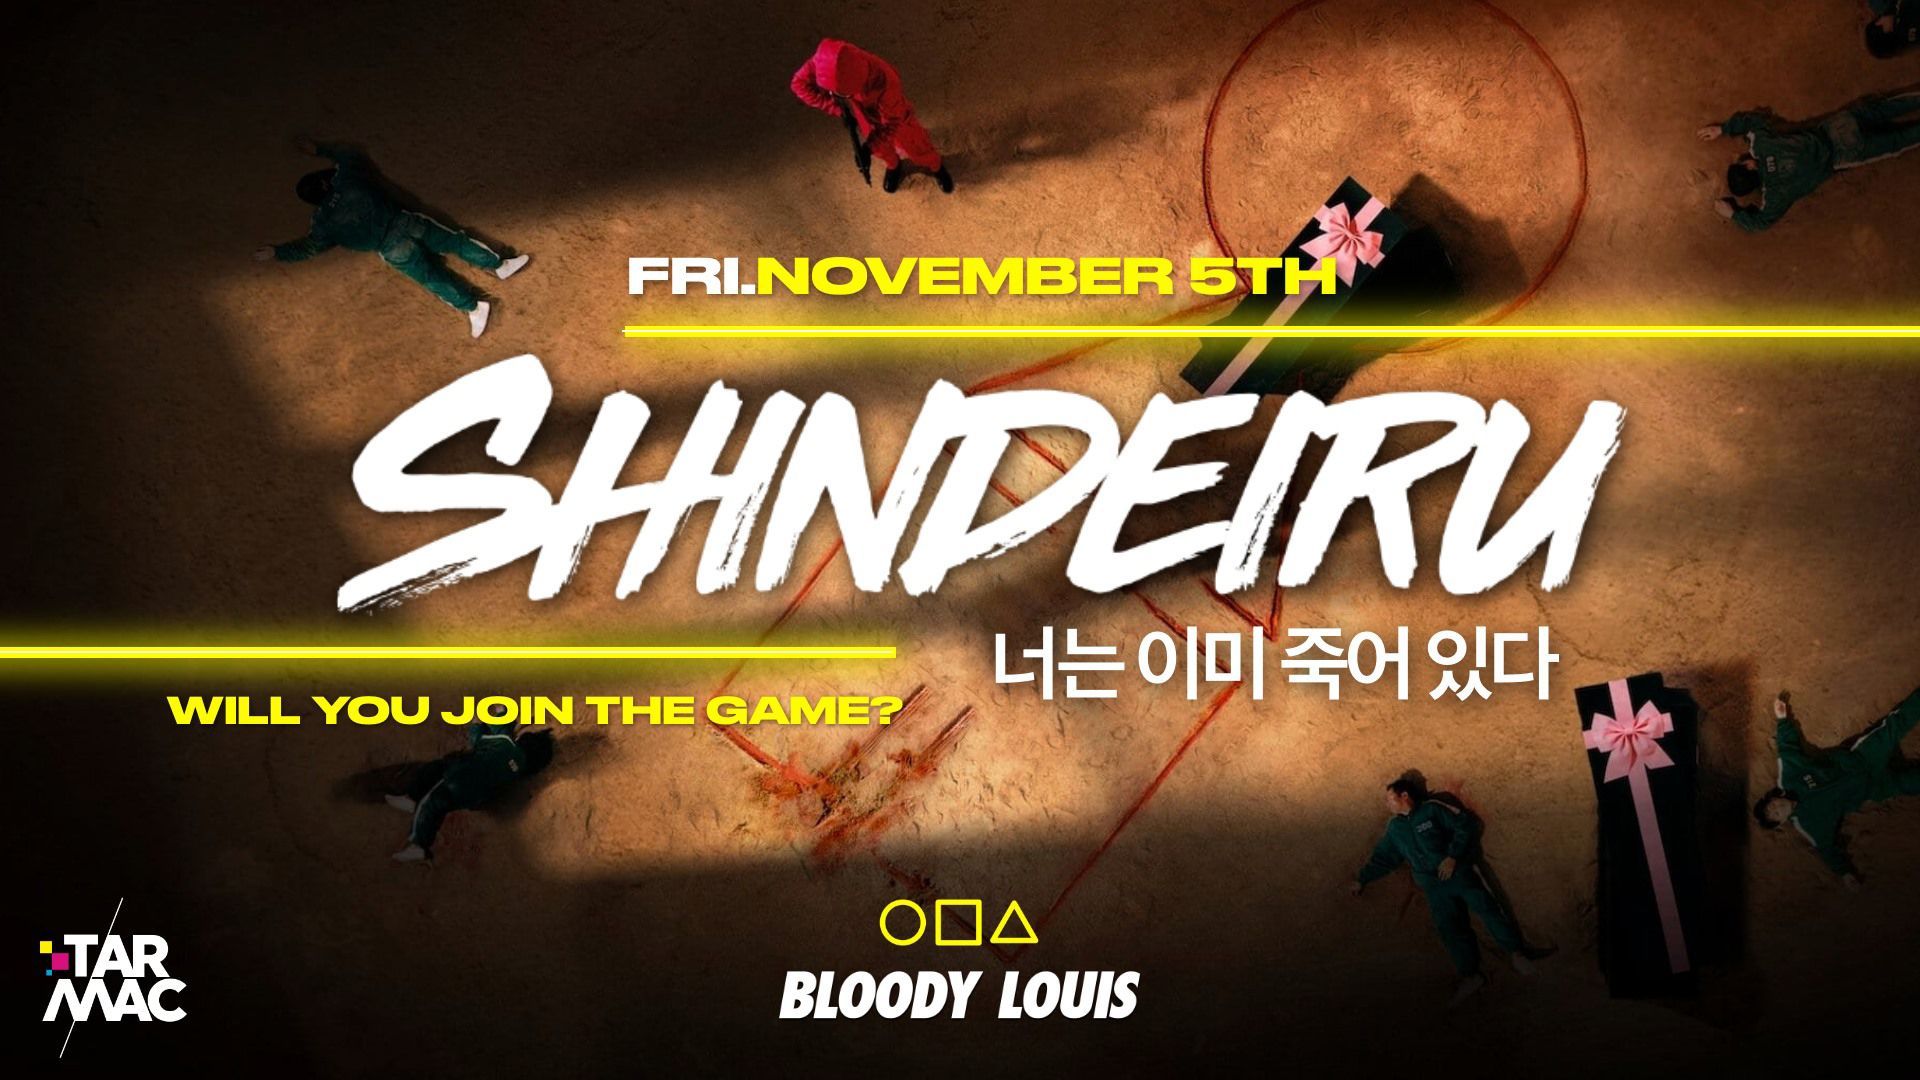 Concours / SHINDEIRU 너는 이미 죽어 있다 au Bloody Louis ... Ready for the Game?